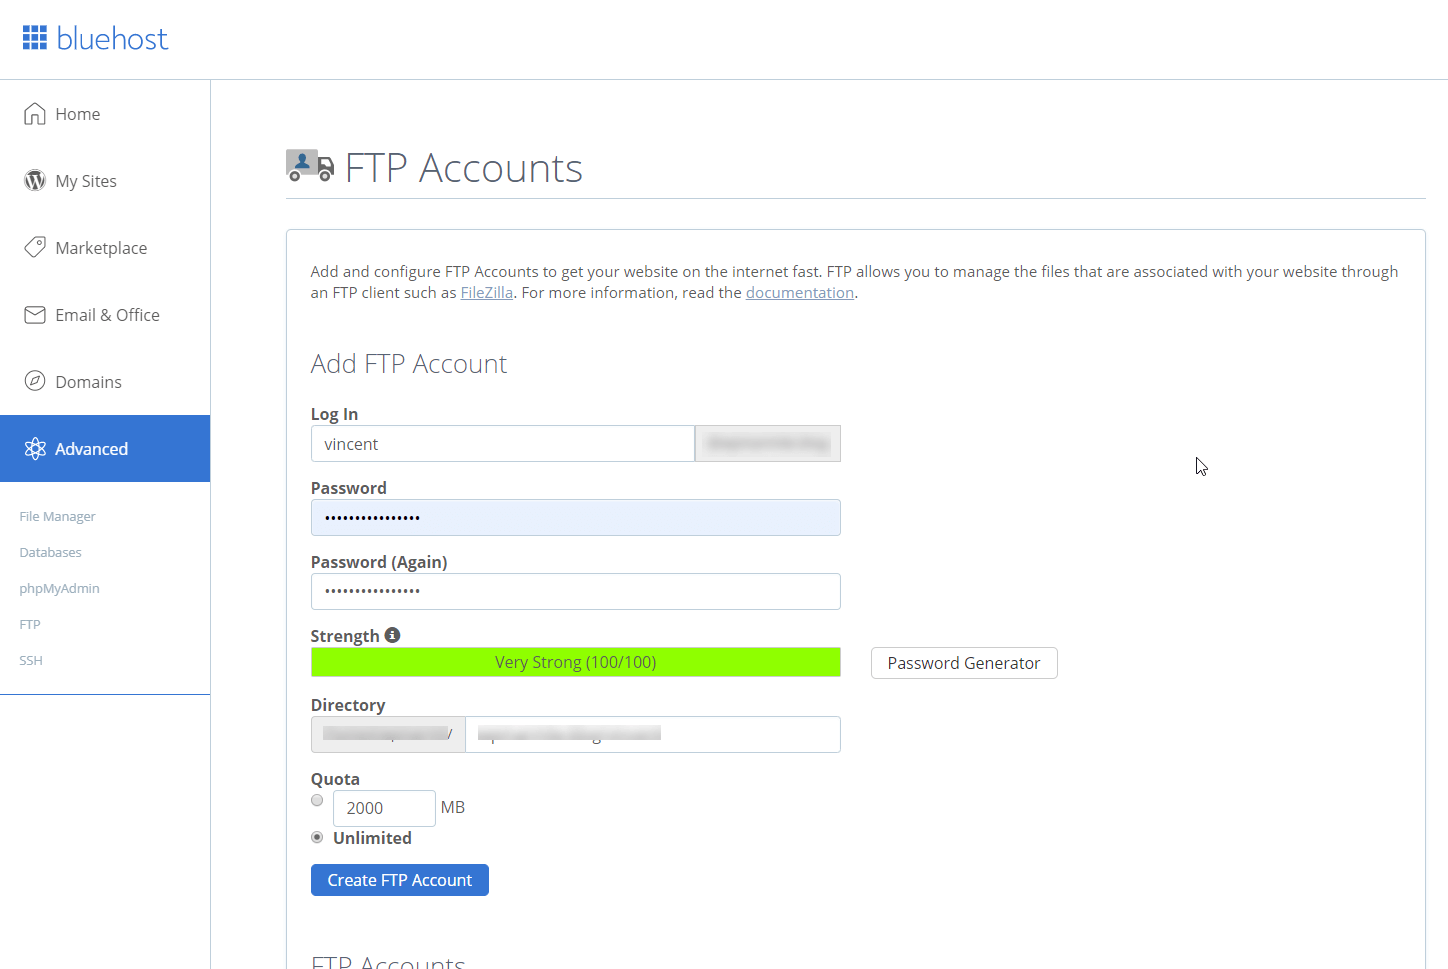 Bluehost interface for creating FTP accounts